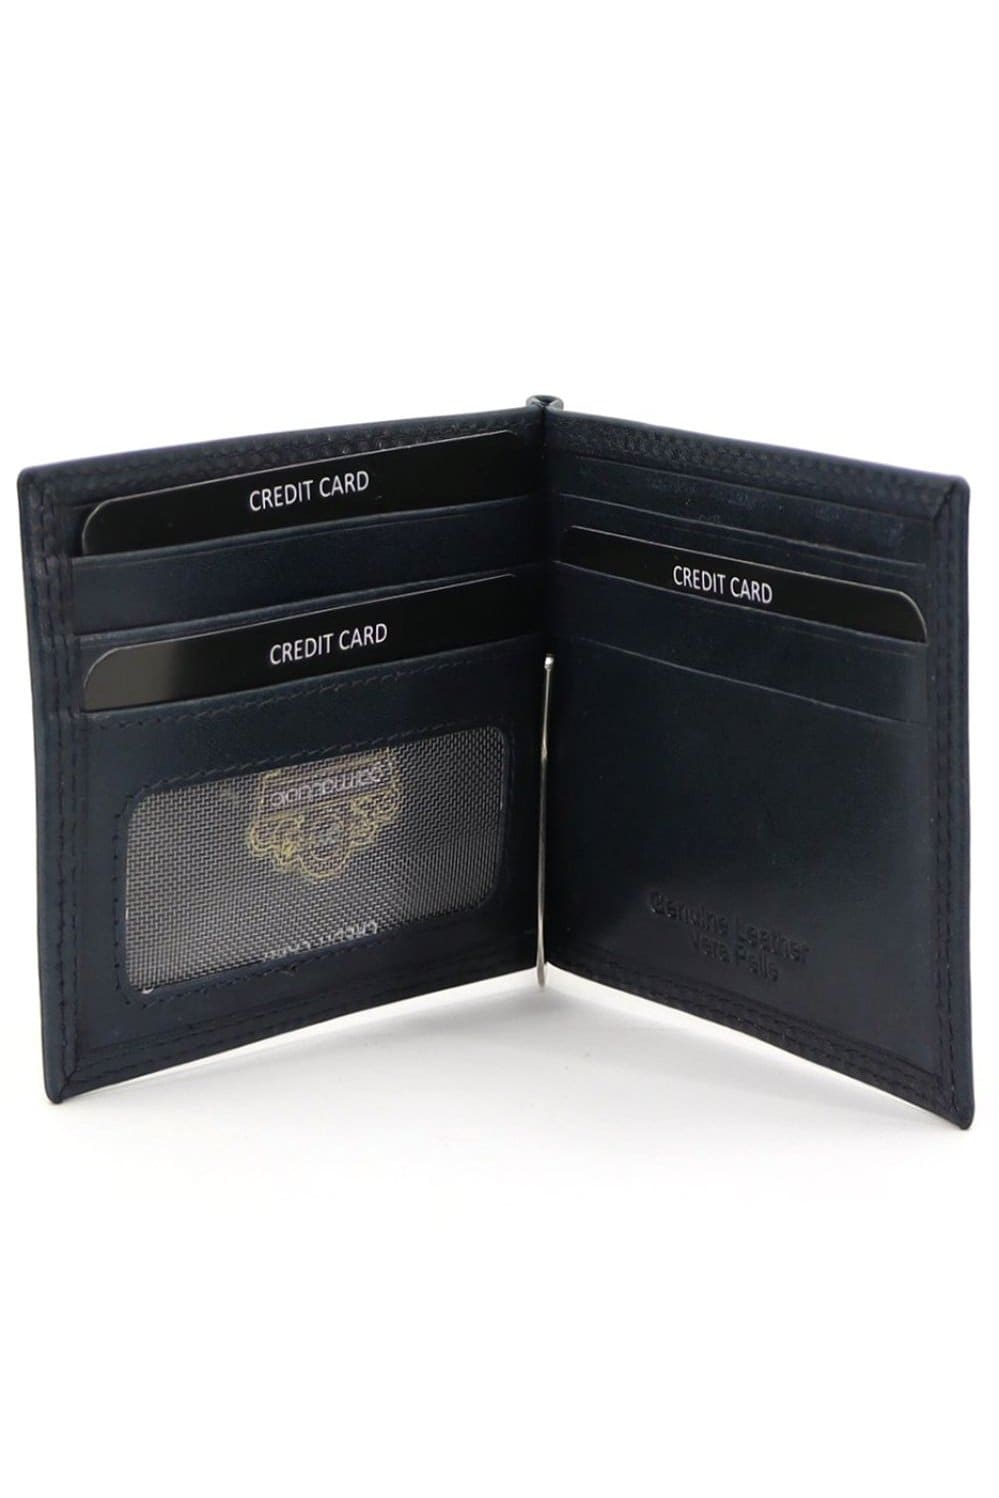 Gai Mattiolo Men's Leather Wallet, Equipped With Metal Money Clip and Space for Credit Cards, Black Fatio General Trading